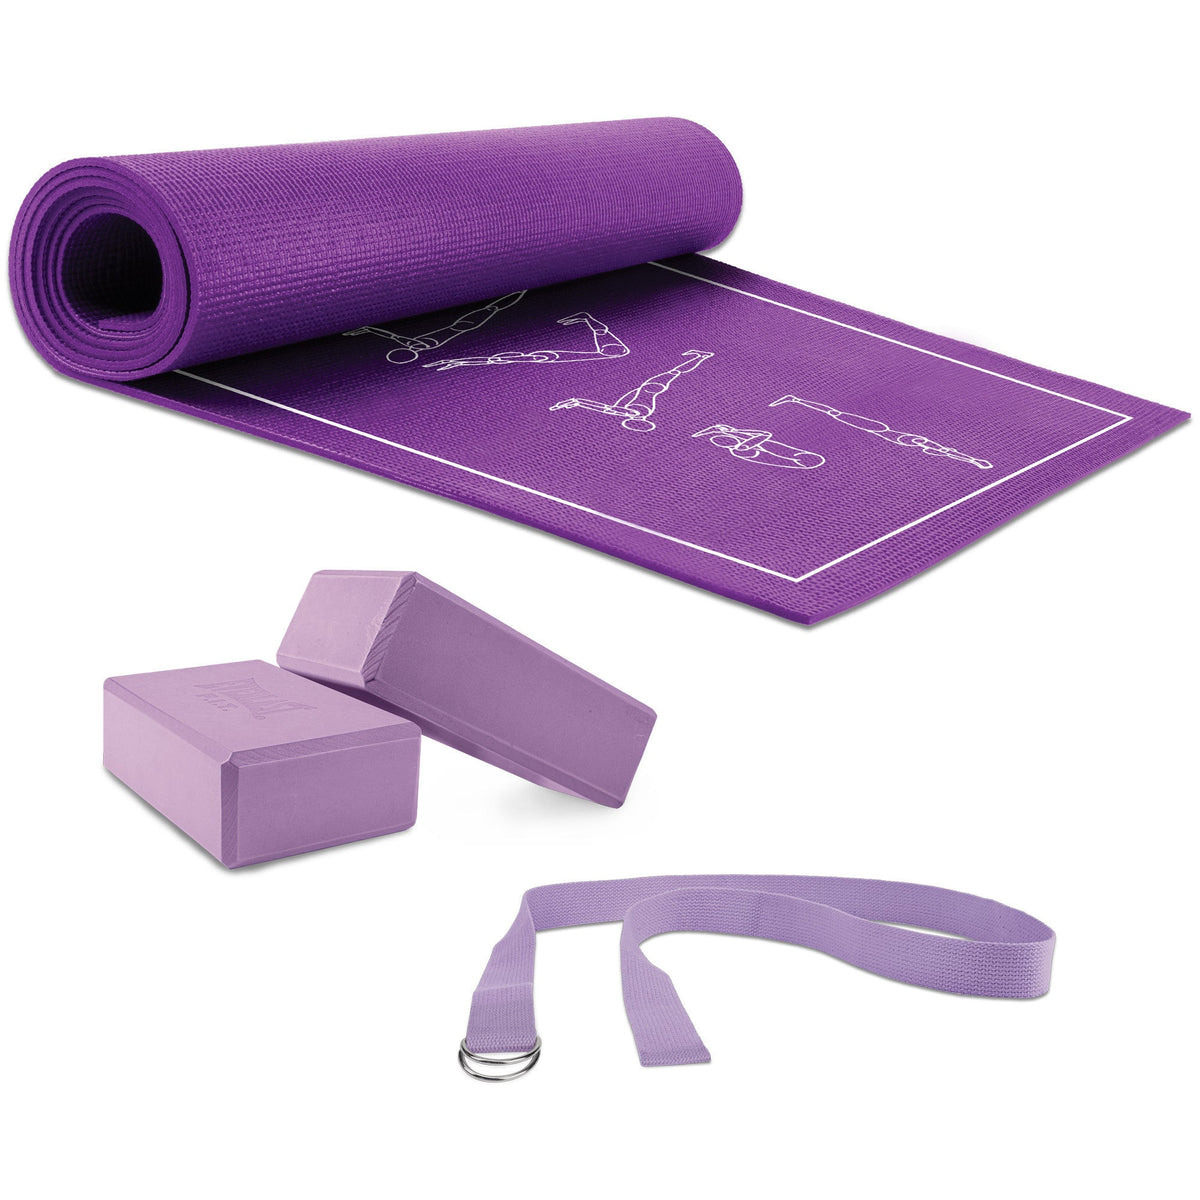 Lomi 8-in-1 Yoga Professional Kit In Ruby 8pc Home Fitness Set